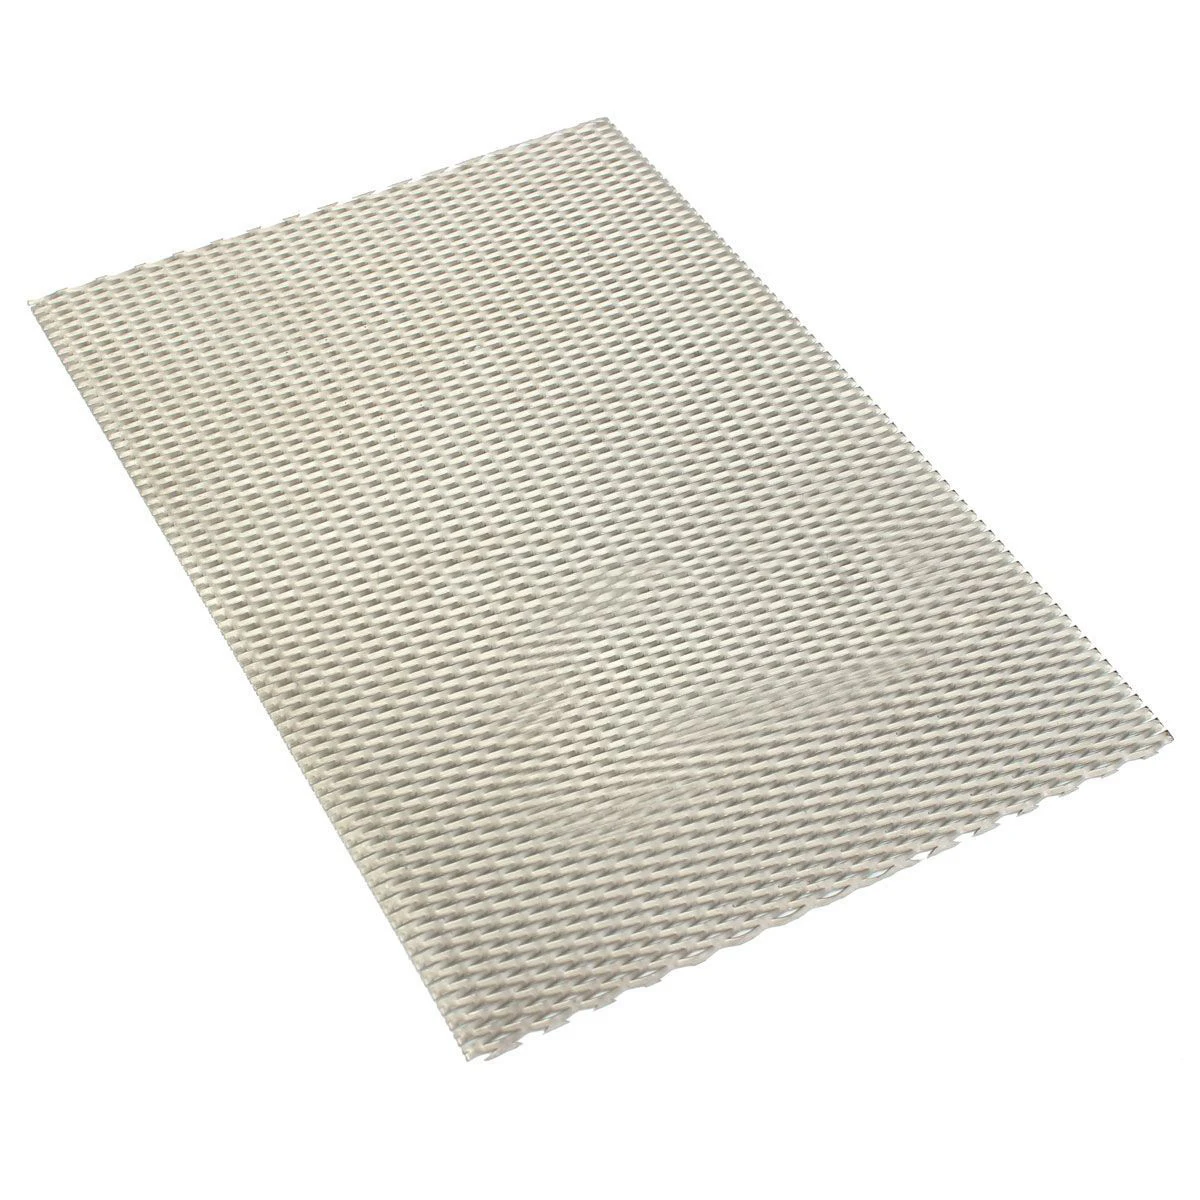 1pc Practical Metal Titanium Mesh Perforated Plate Expanded Titanium Sheet 200mm*300mm*0.5mm For Power Aerospace Mayitr